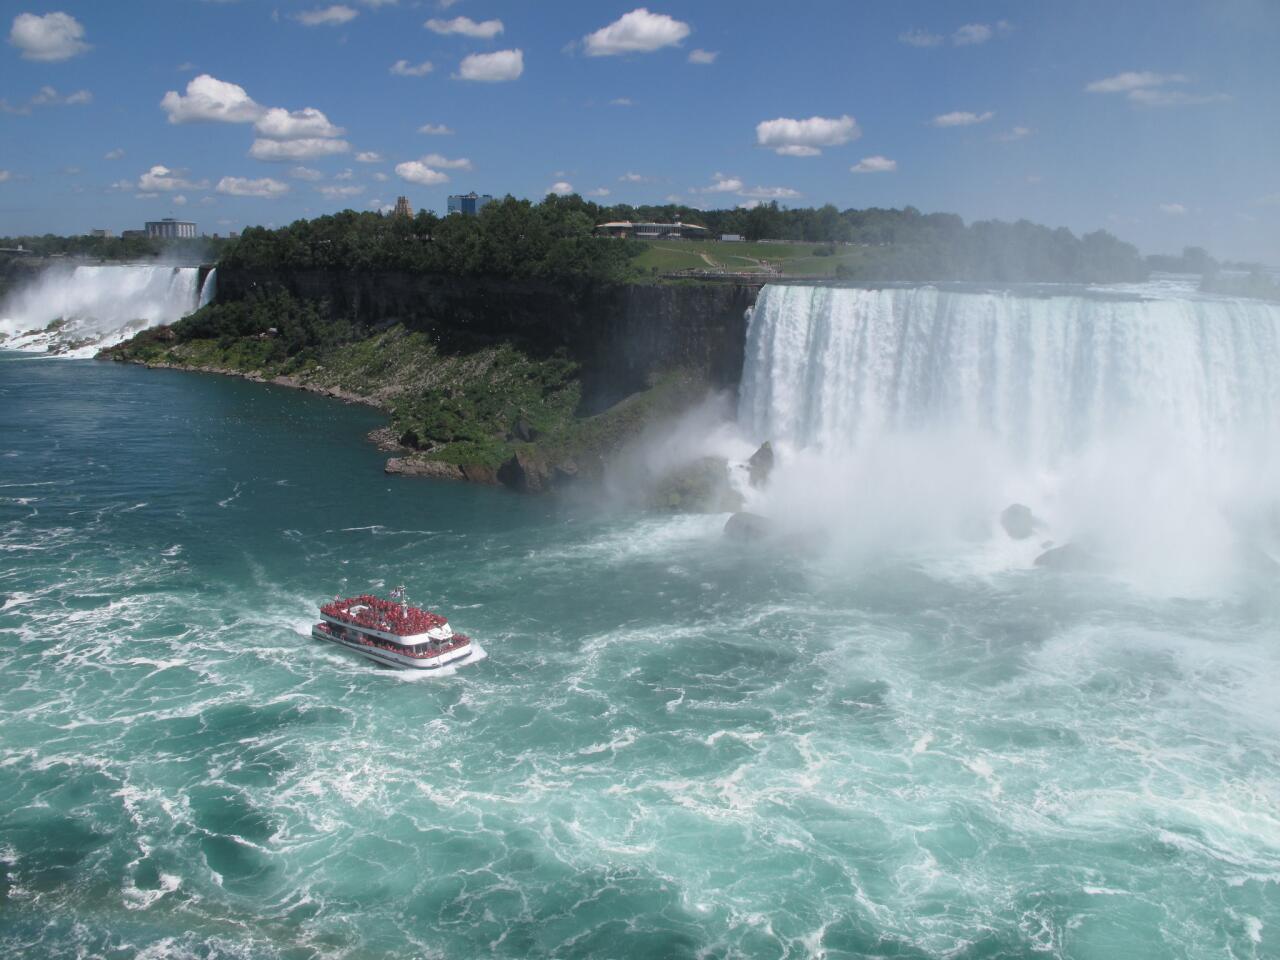 Everyone should visit Niagara Falls at least once, and it's one of the stops on Haimark Travel's Great Lakes cruise.